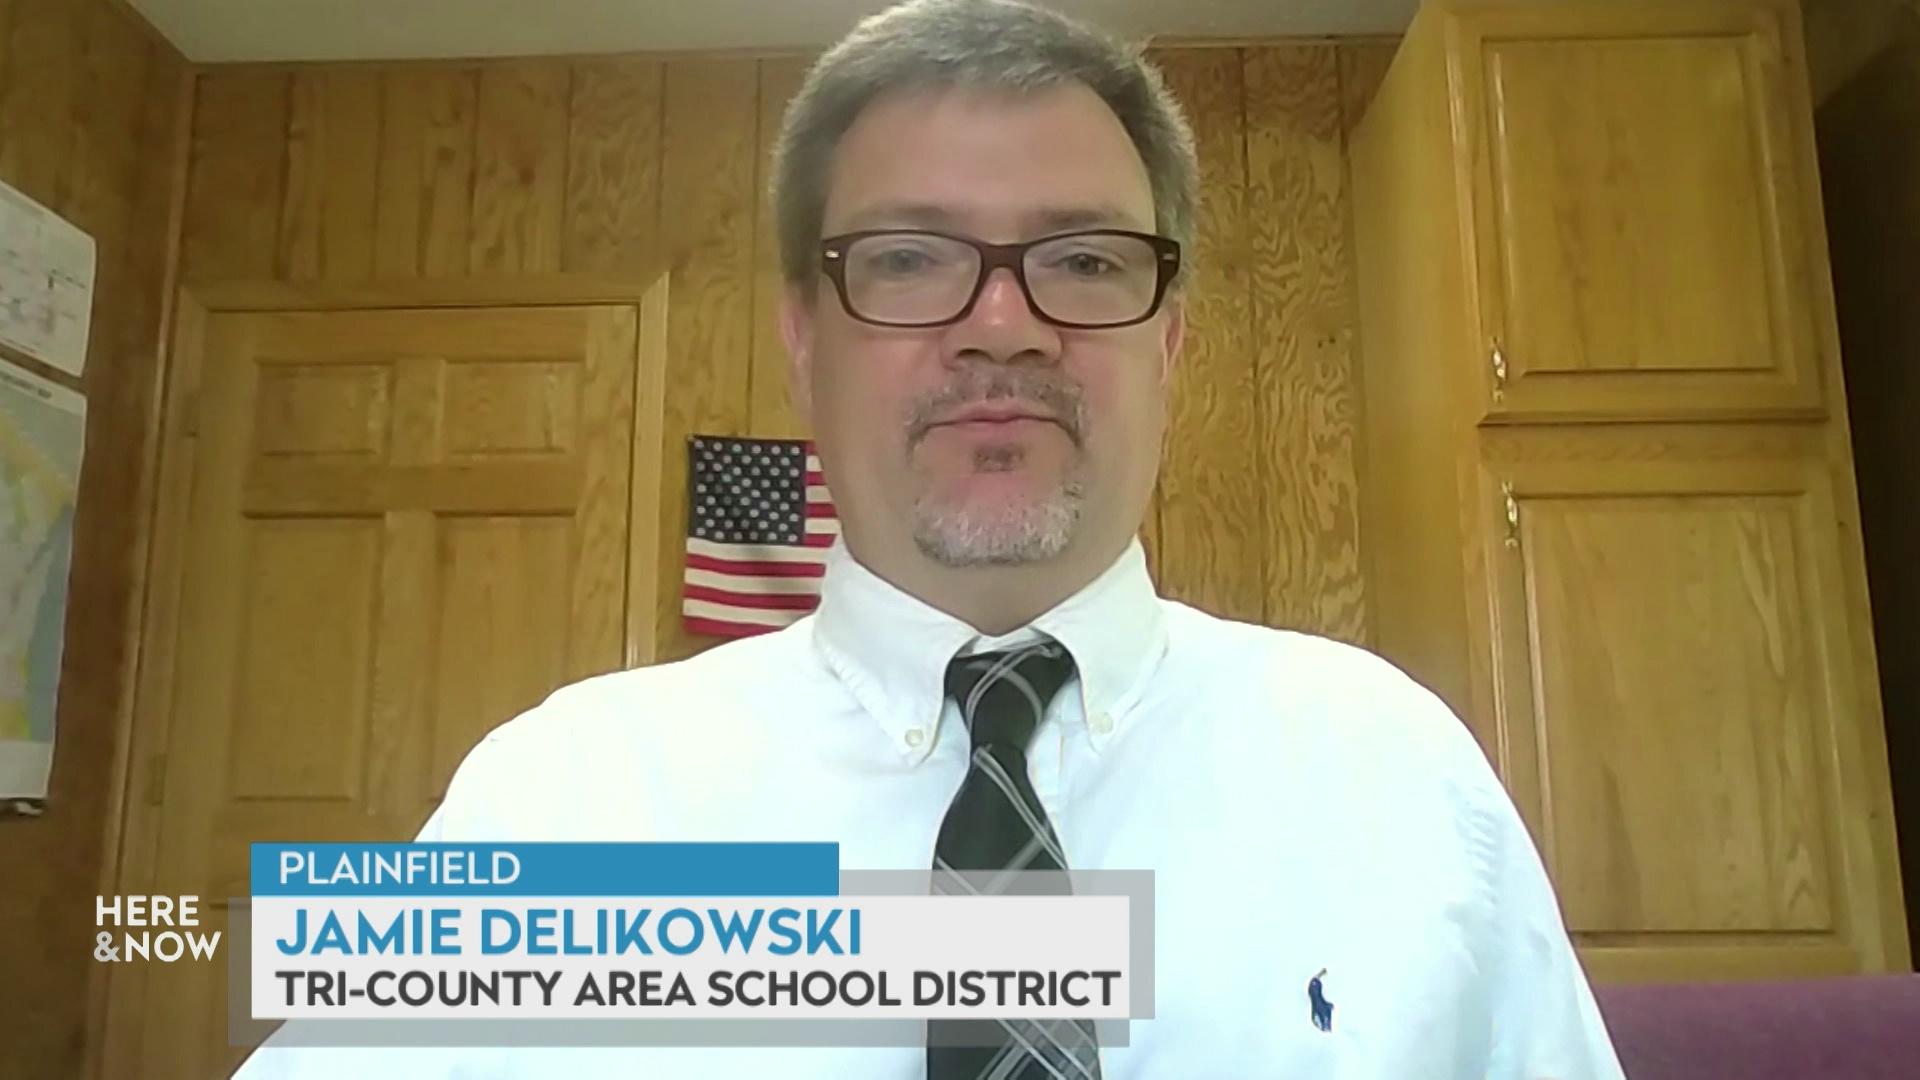 A still image from a video shows Jamie Delikowski seated in front of wooden walls and door with a graphic at bottom reading 'Plainfield,' 'Jamie Delikowski' and 'Tri-County Area School District.'